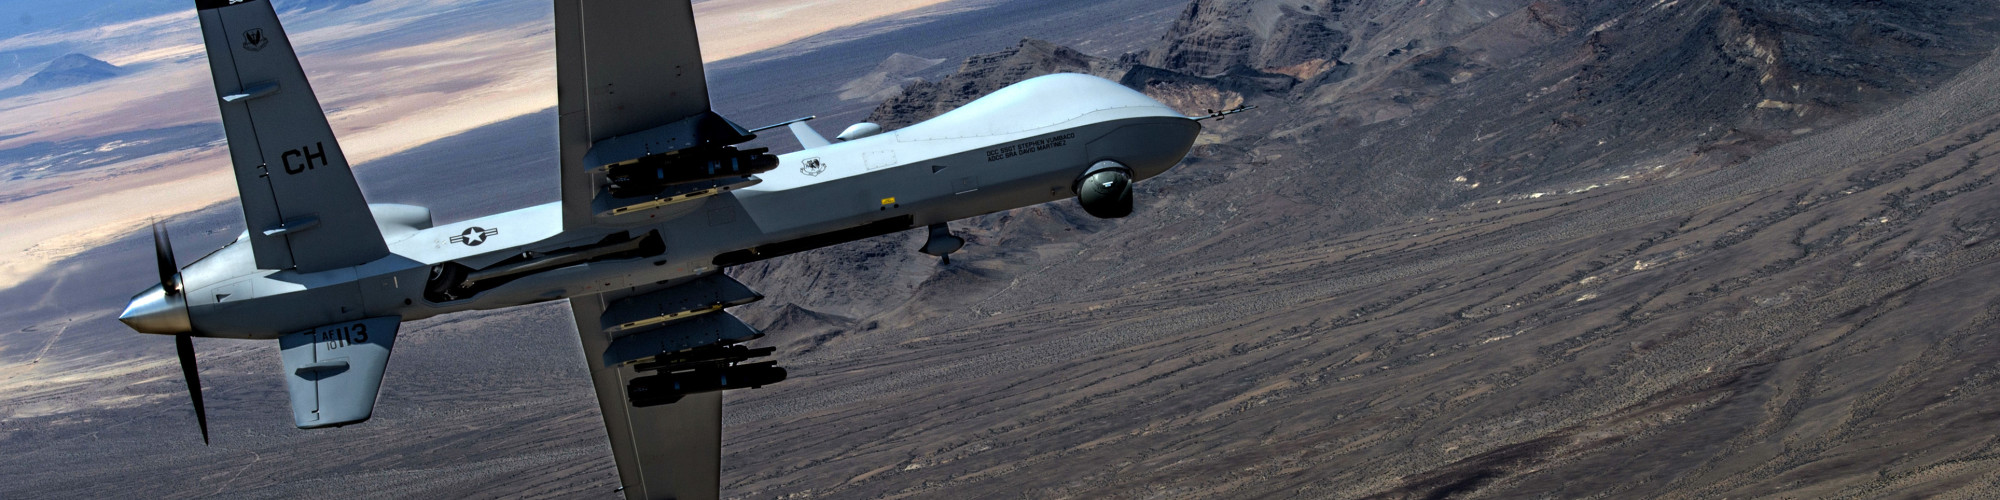 An MQ- Reaper remotely piloted aircraft performs aerial maneuvers over Creech Air Force Base, Nev., June 25, 2015. The MQ-9 Reaper is an armed, multi-mission, medium-altitude, long-endurance remotely piloted aircraft that is employed primarily as an intelligence-collection asset and secondarily against dynamic execution targets. (U.S. Air Force photo by Senior Airman Cory D. Payne/Not Reviewed)